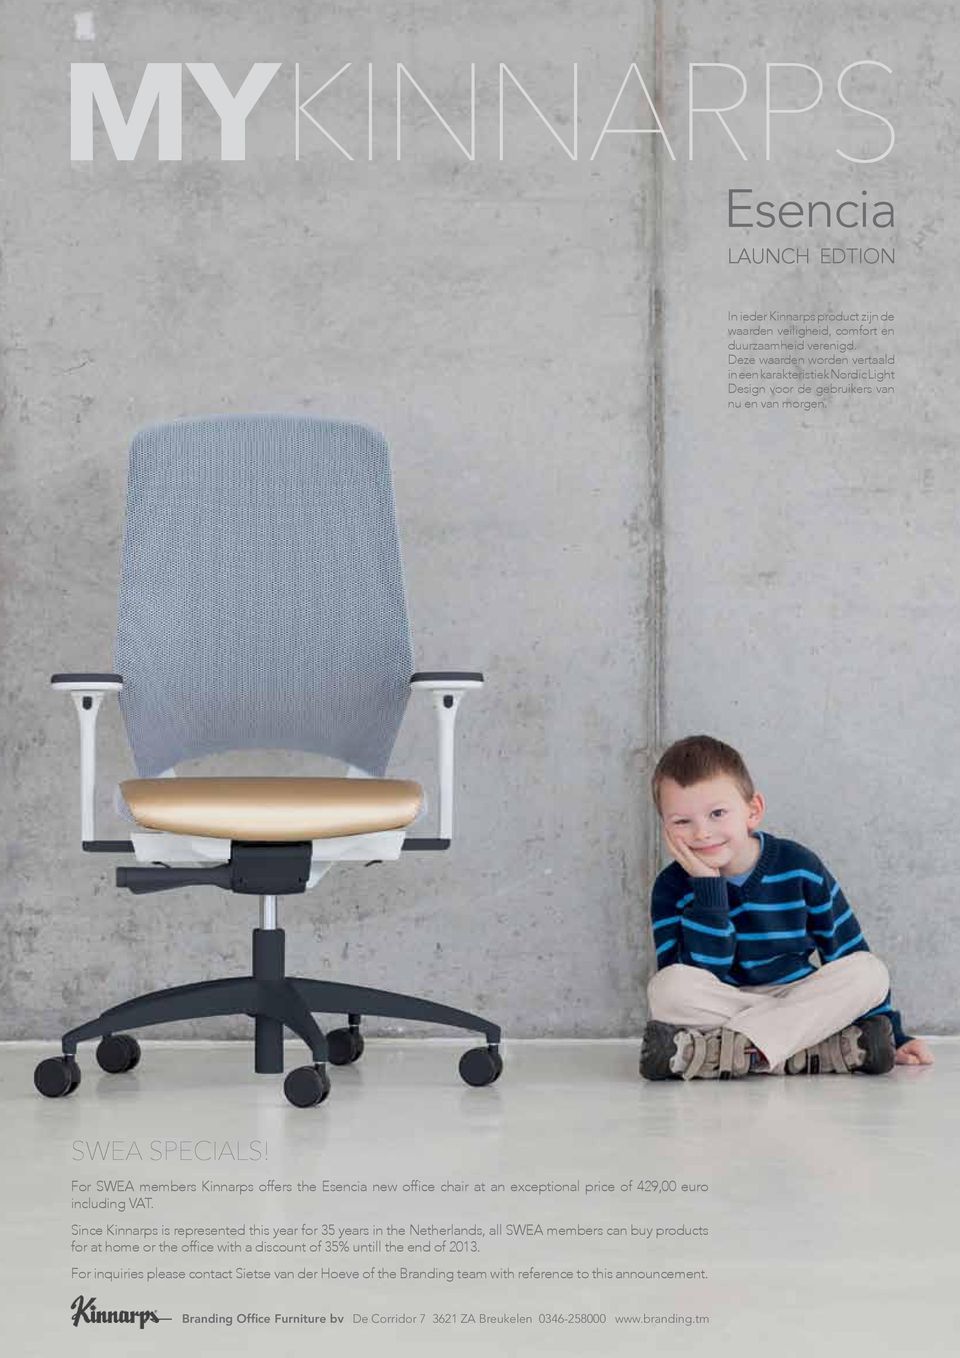 For SWEA members Kinnarps offers the Esencia new office chair at an exceptional price of 429, euro including VAT.